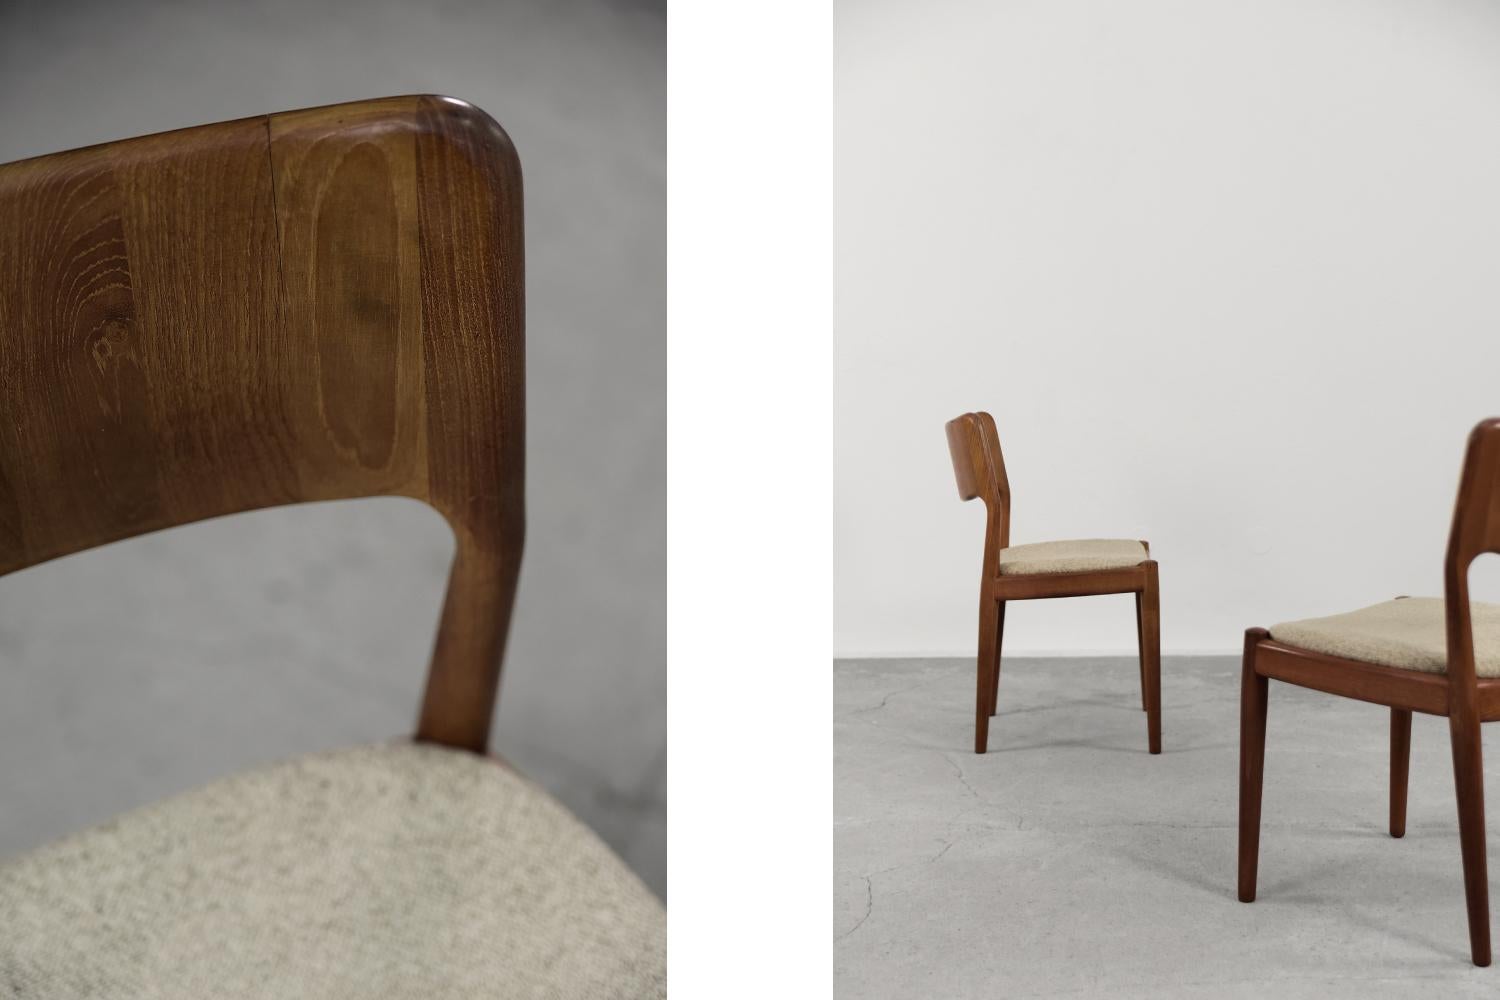 Set of 4 Vintage Scandinavian Midcentury Modern Teak Wood & Fabric Dining Chairs In Good Condition For Sale In Warszawa, Mazowieckie